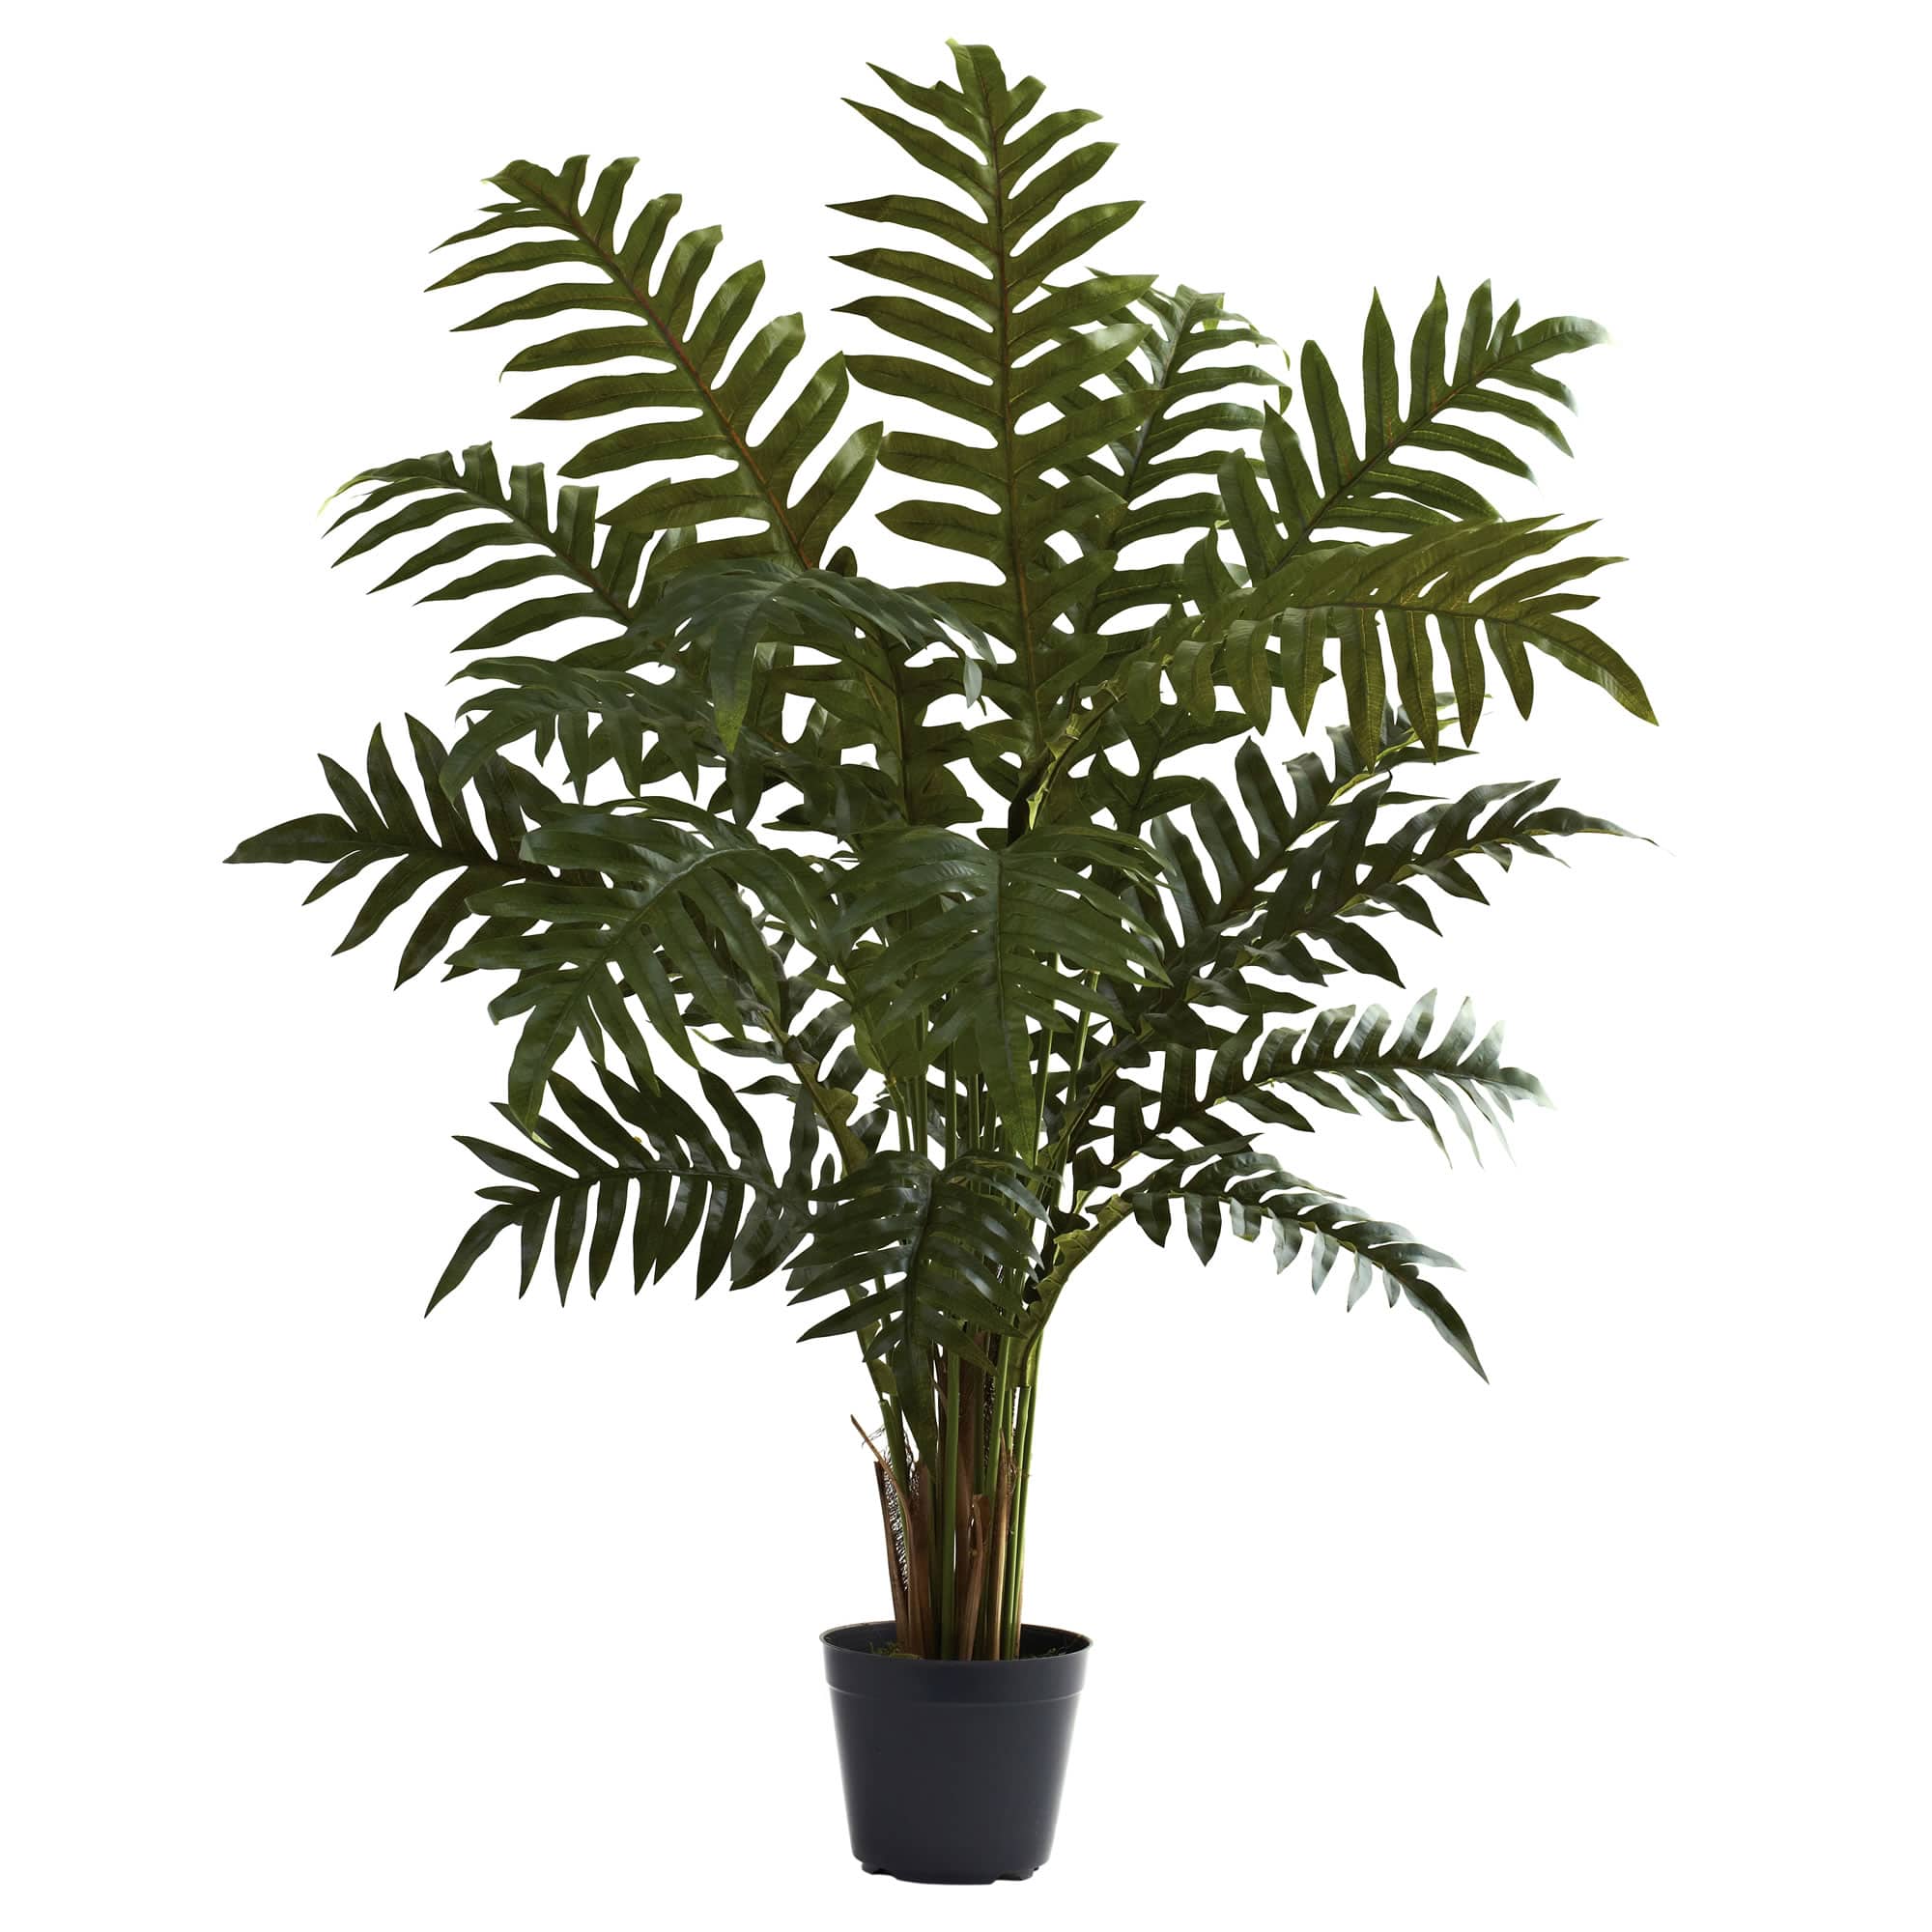 3.5ft. Potted Evergreen Tree